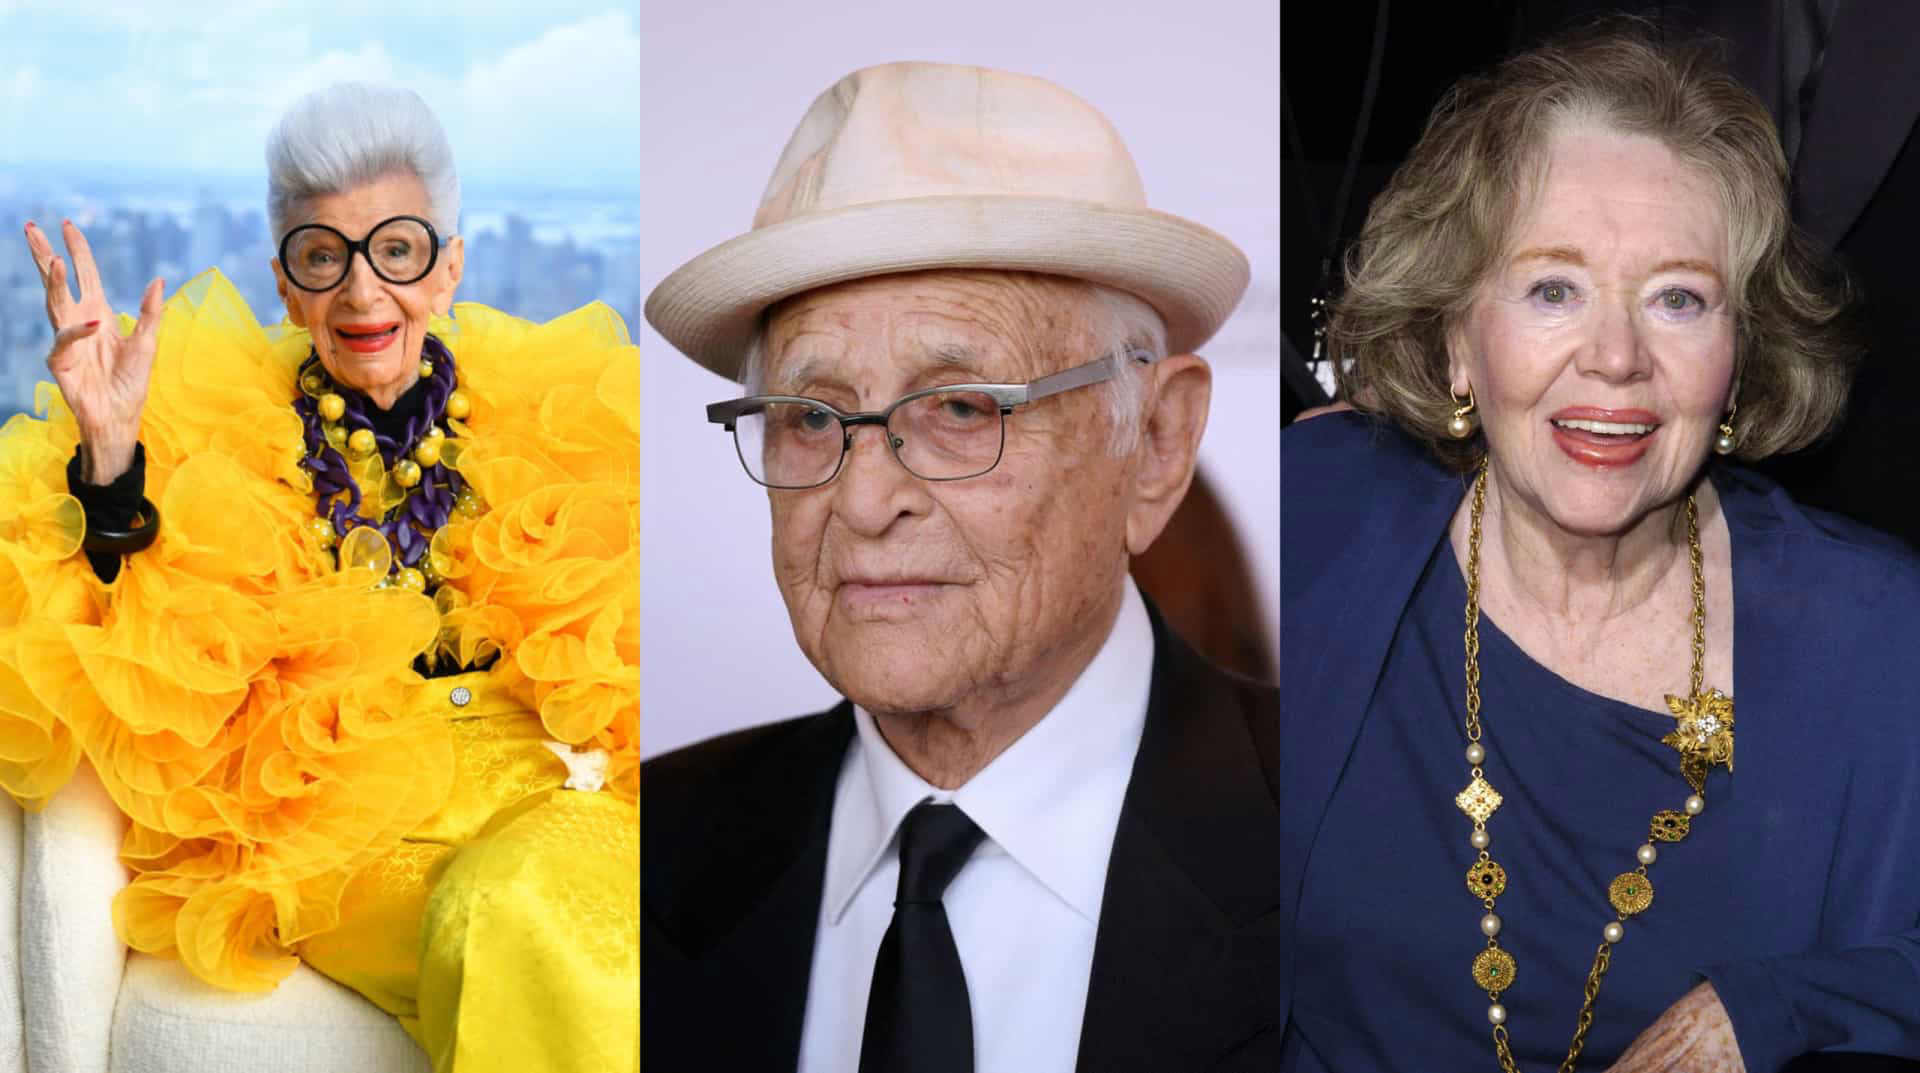 Famous people who reached the age of 100 (and beyond)